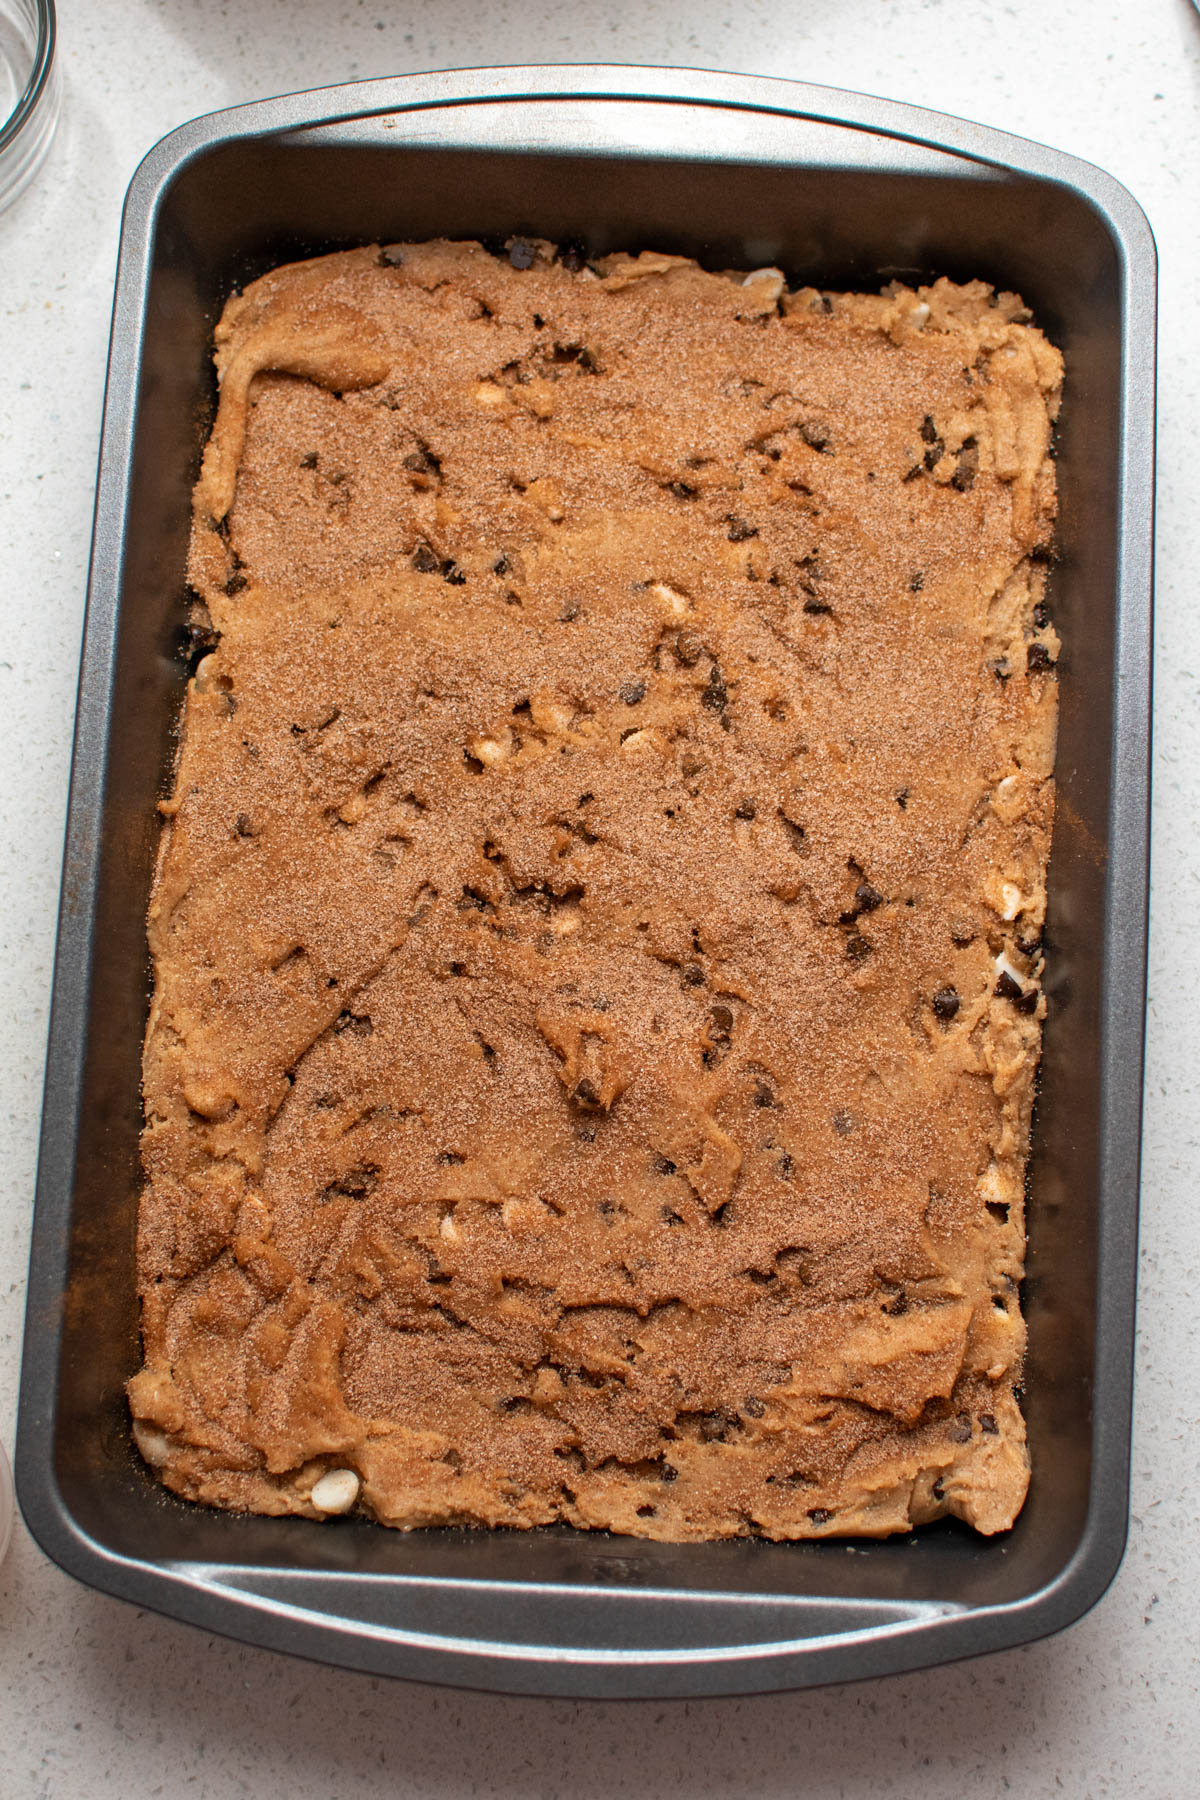 Metal pan of unbaked chocolate chip blondies on counter top.